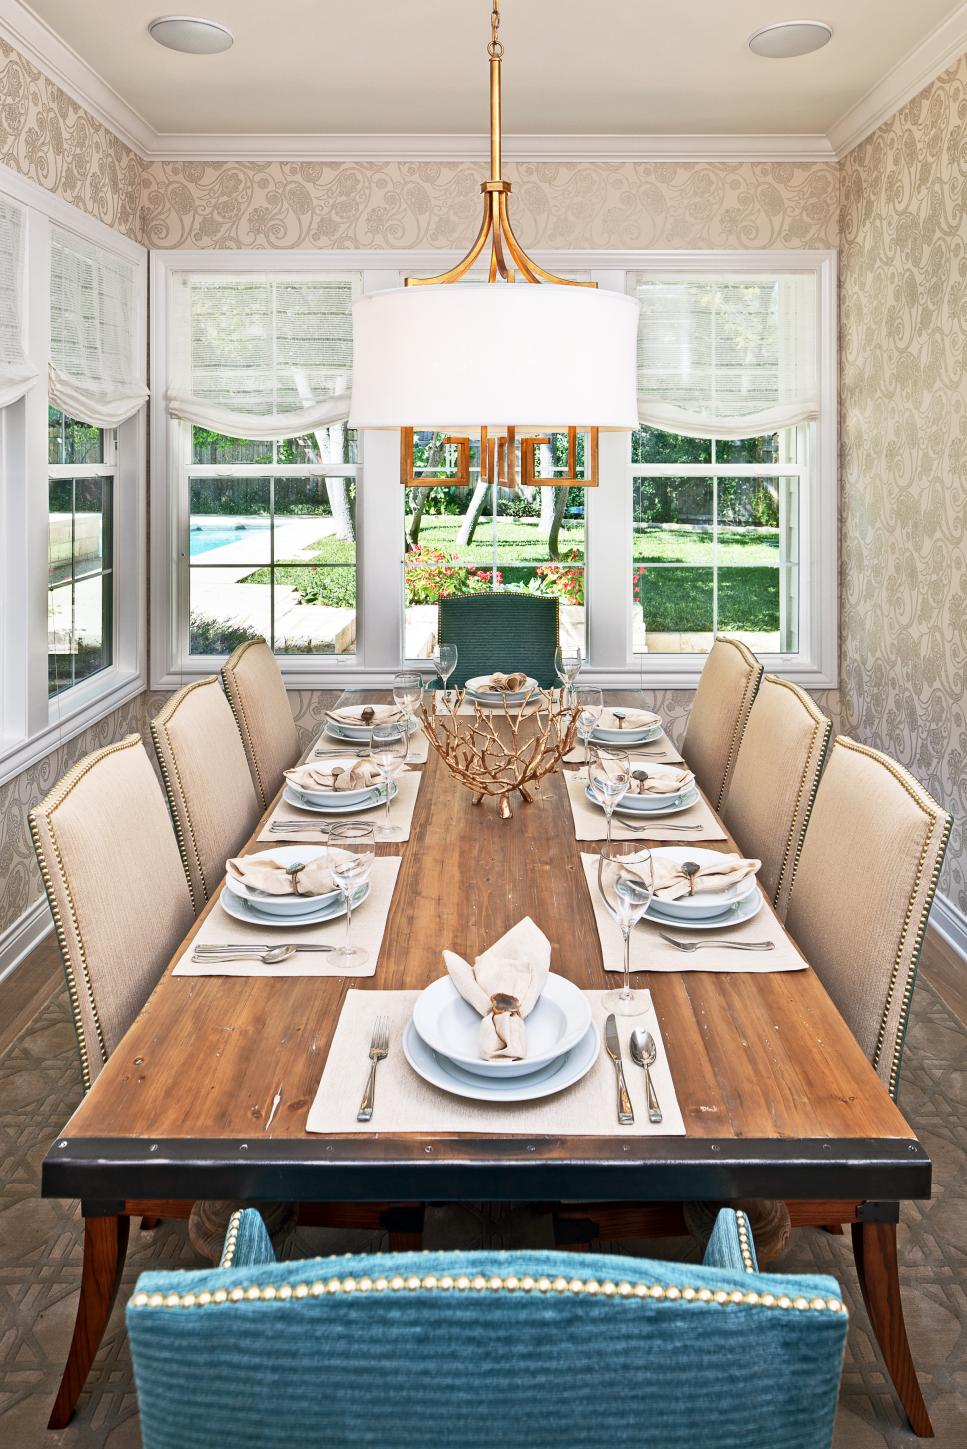 Contemporary Country Dining Room With Wood Table